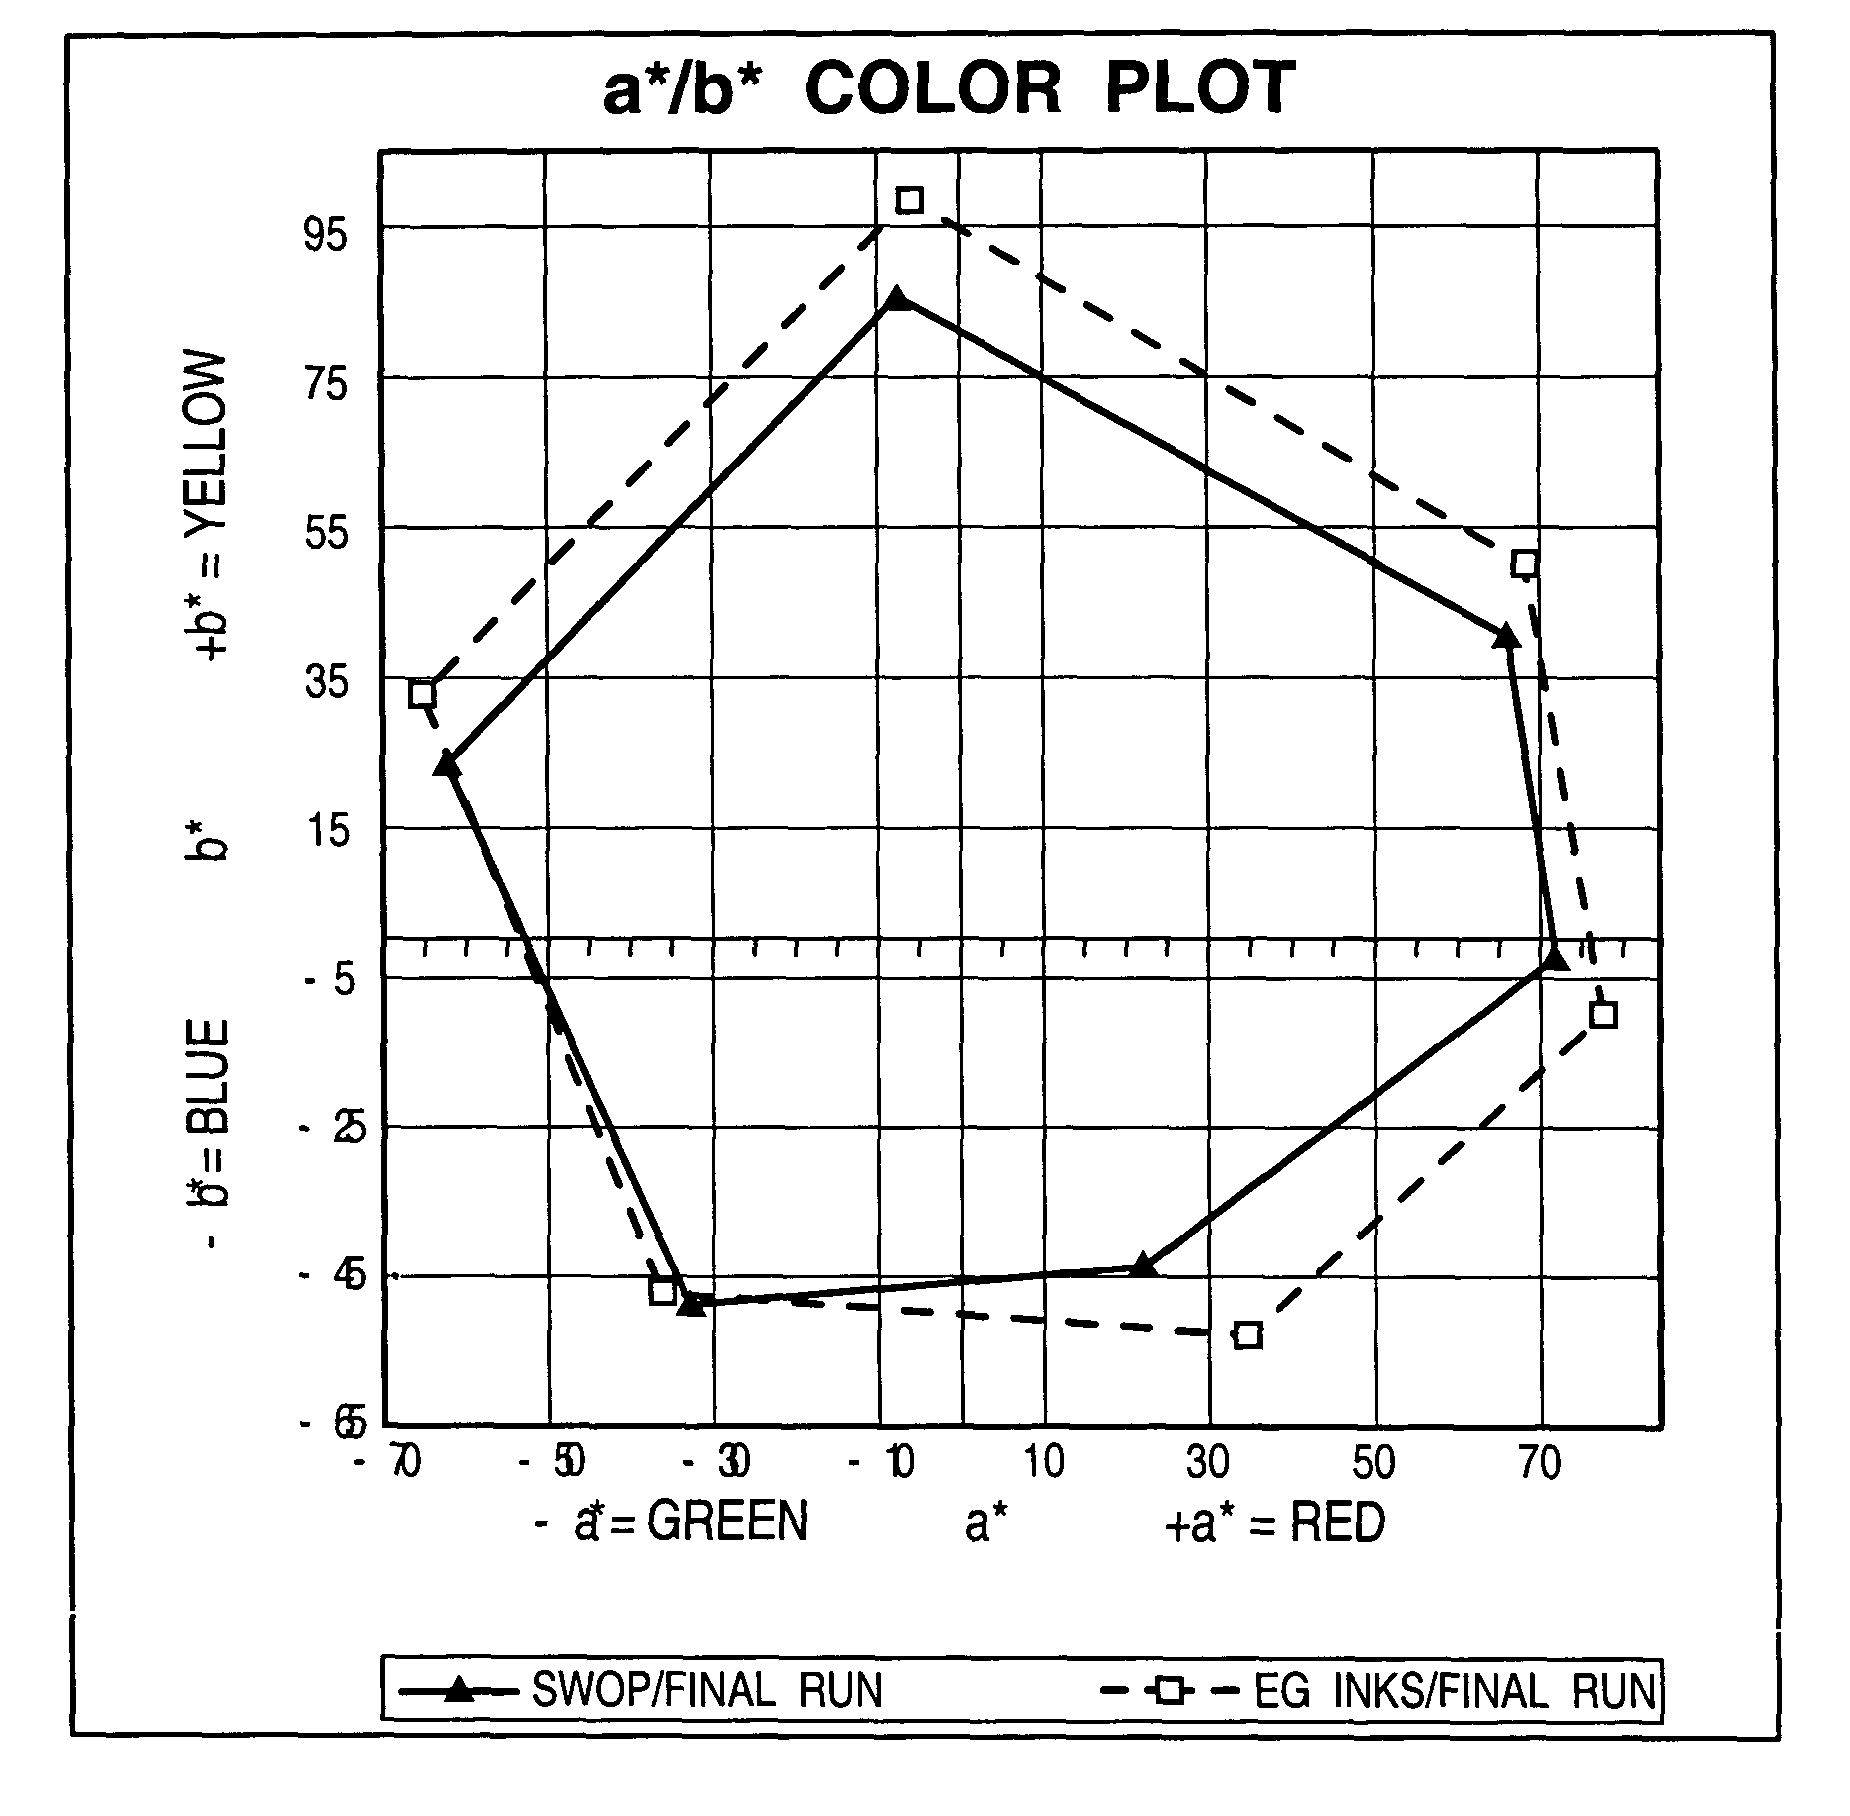 Ink set with expanded color gamut and process for using same